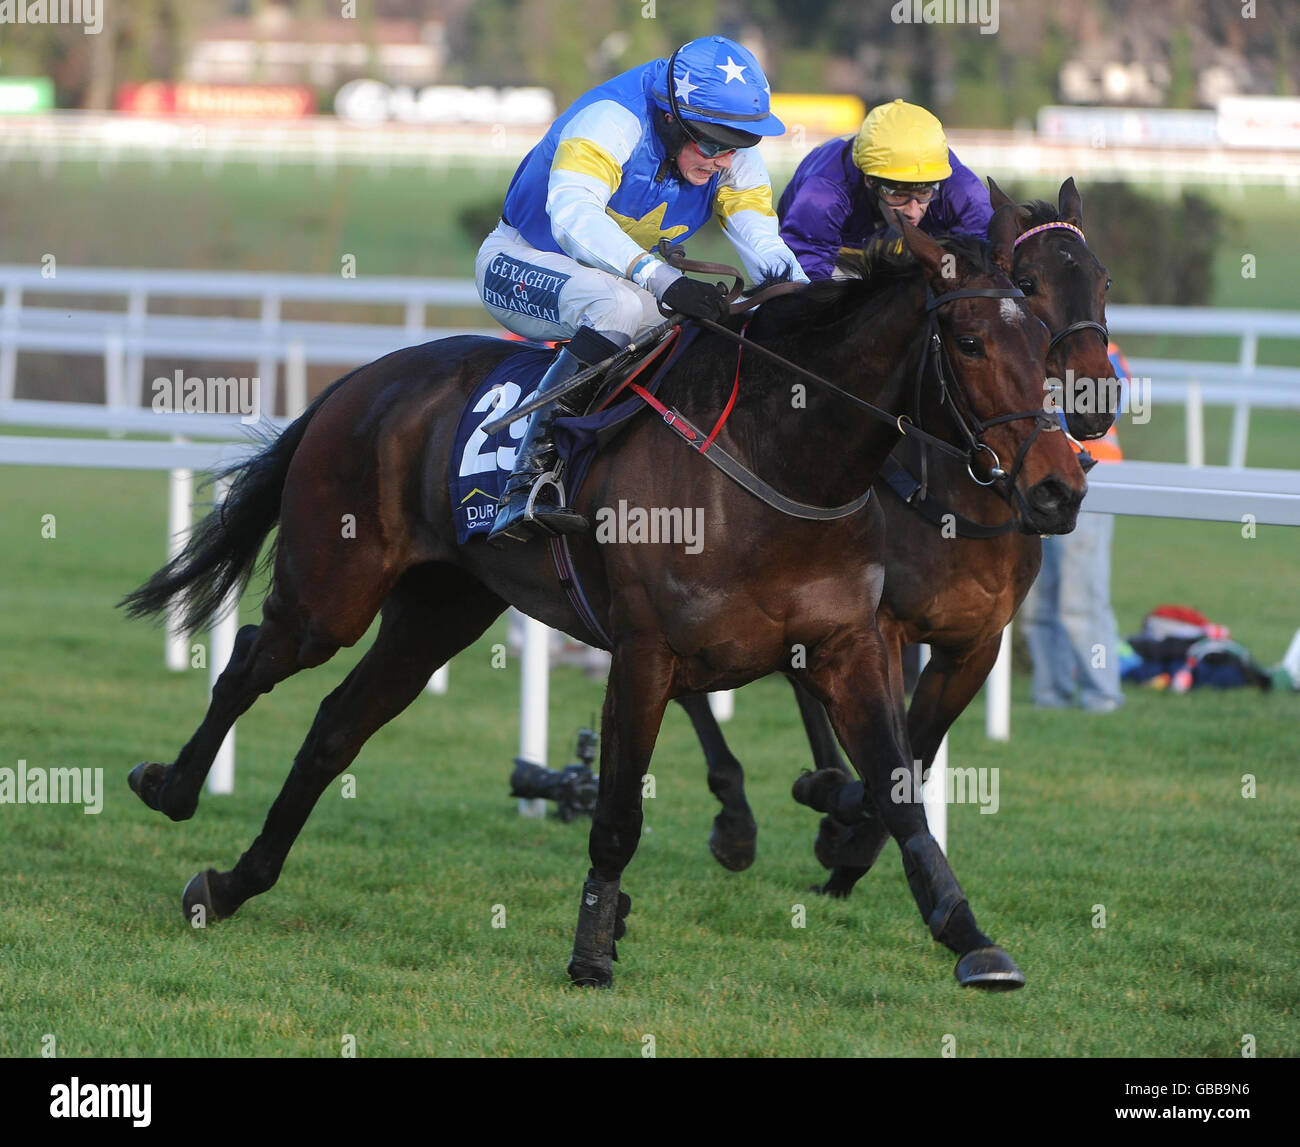 Voler La Vedette with jockey Matt O'Connor up, races towards the finish after clearing the last on their way to winning the Durkan New Homes 4-y-o Maiden Hurdle during Stephens Day and Durkan Day at Leopardstown Racecourse, Ireland. Stock Photo